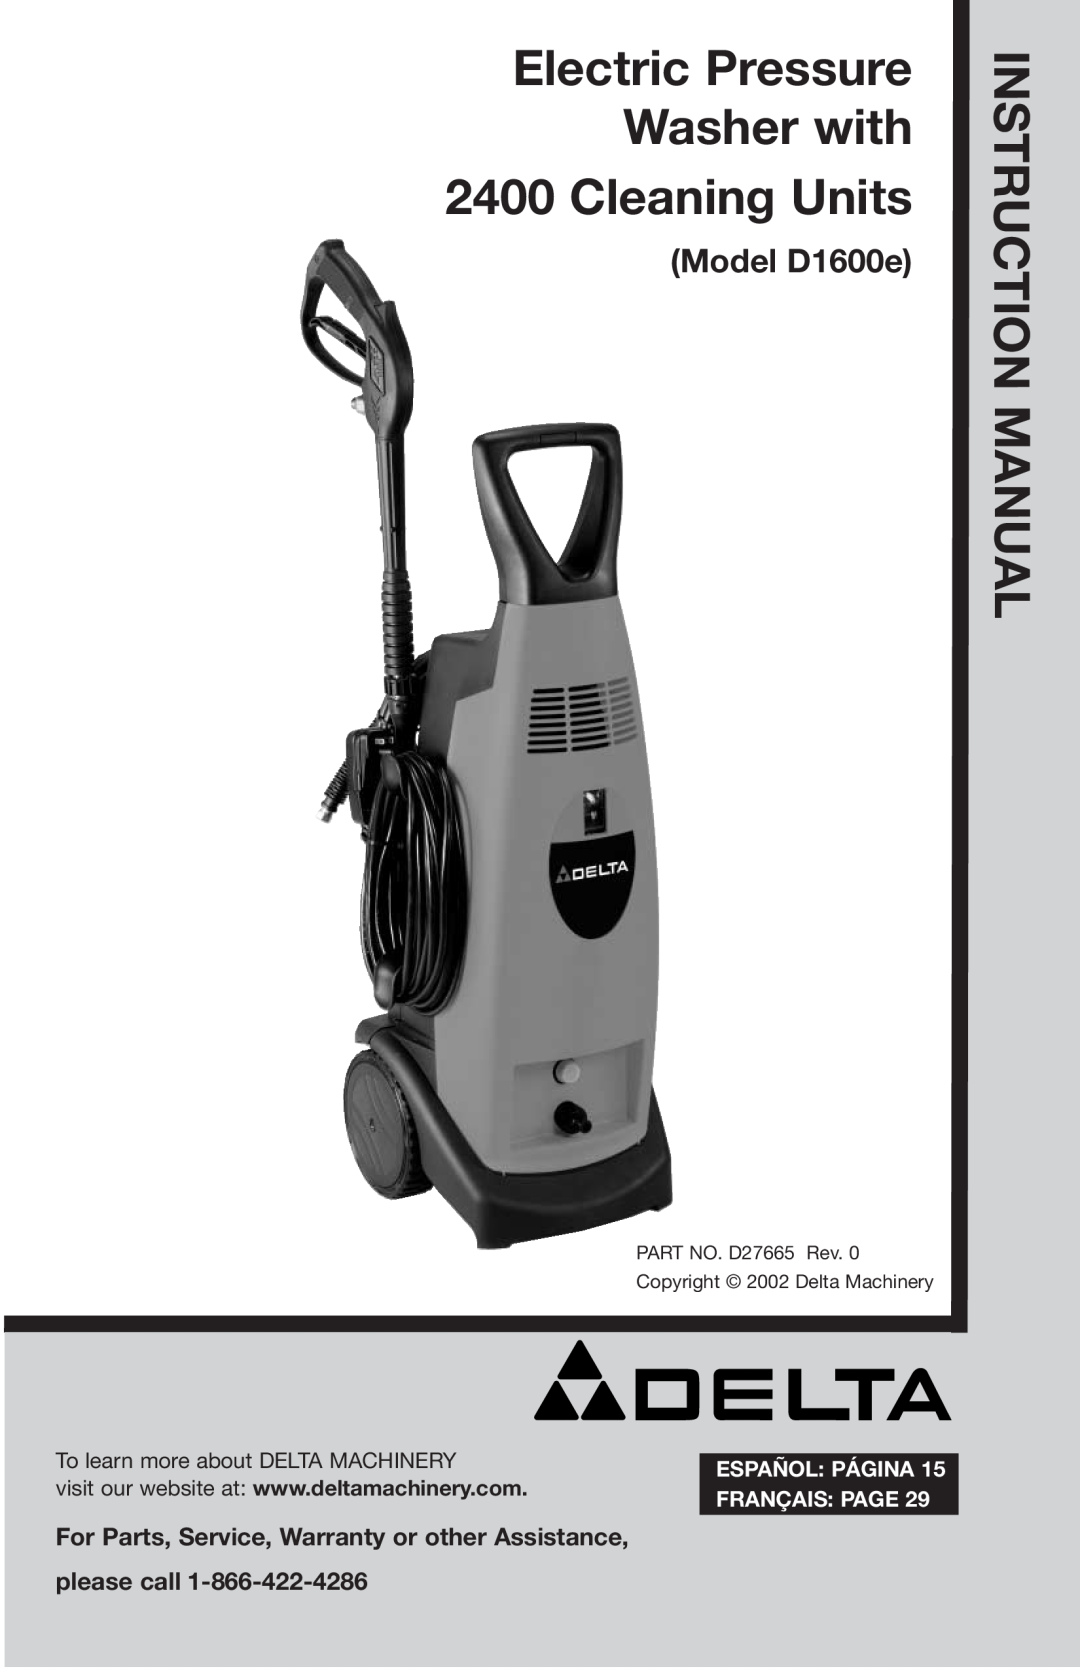 Delta D27665 instruction manual Model D1600e, Electric Pressure Washer with 2400 Cleaning Units, Instruction Man Ual 